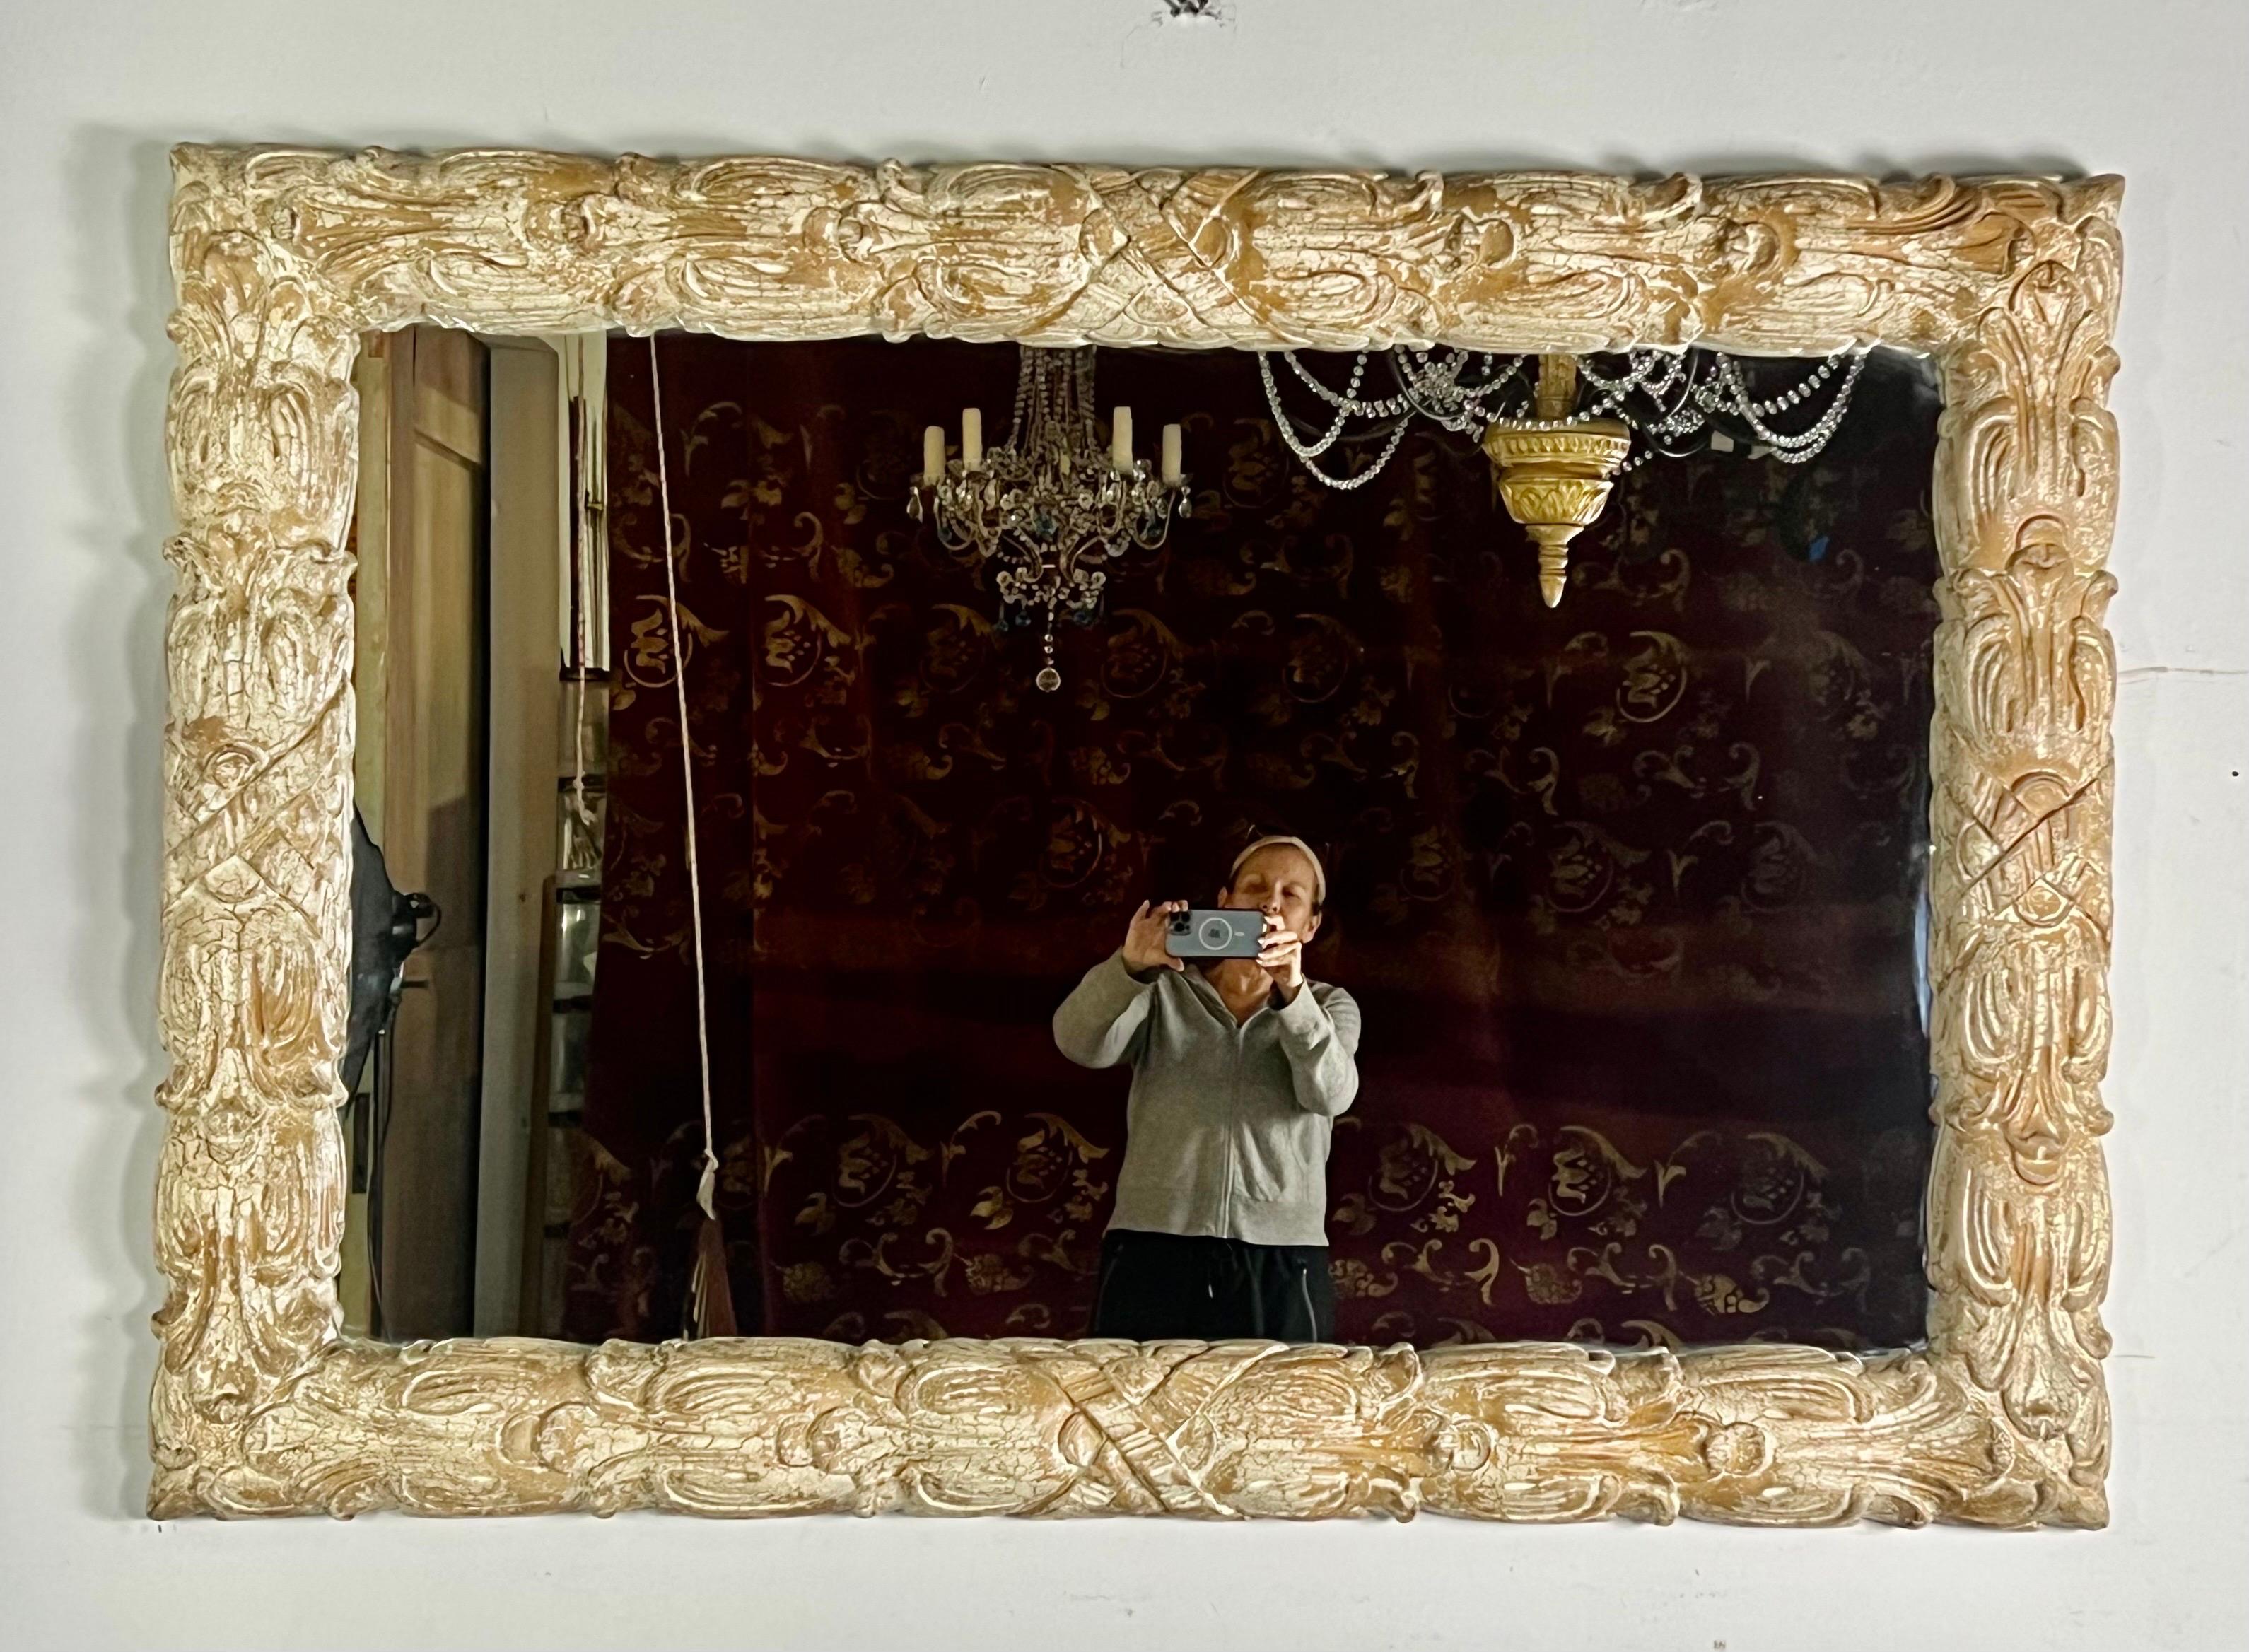 Grand scale French style rectangular shaped mirror that can be installed vertically or horizontally. It has a custom painted crackle finish in a creamy oatmeal color that was popular in the Mid-20th Century.